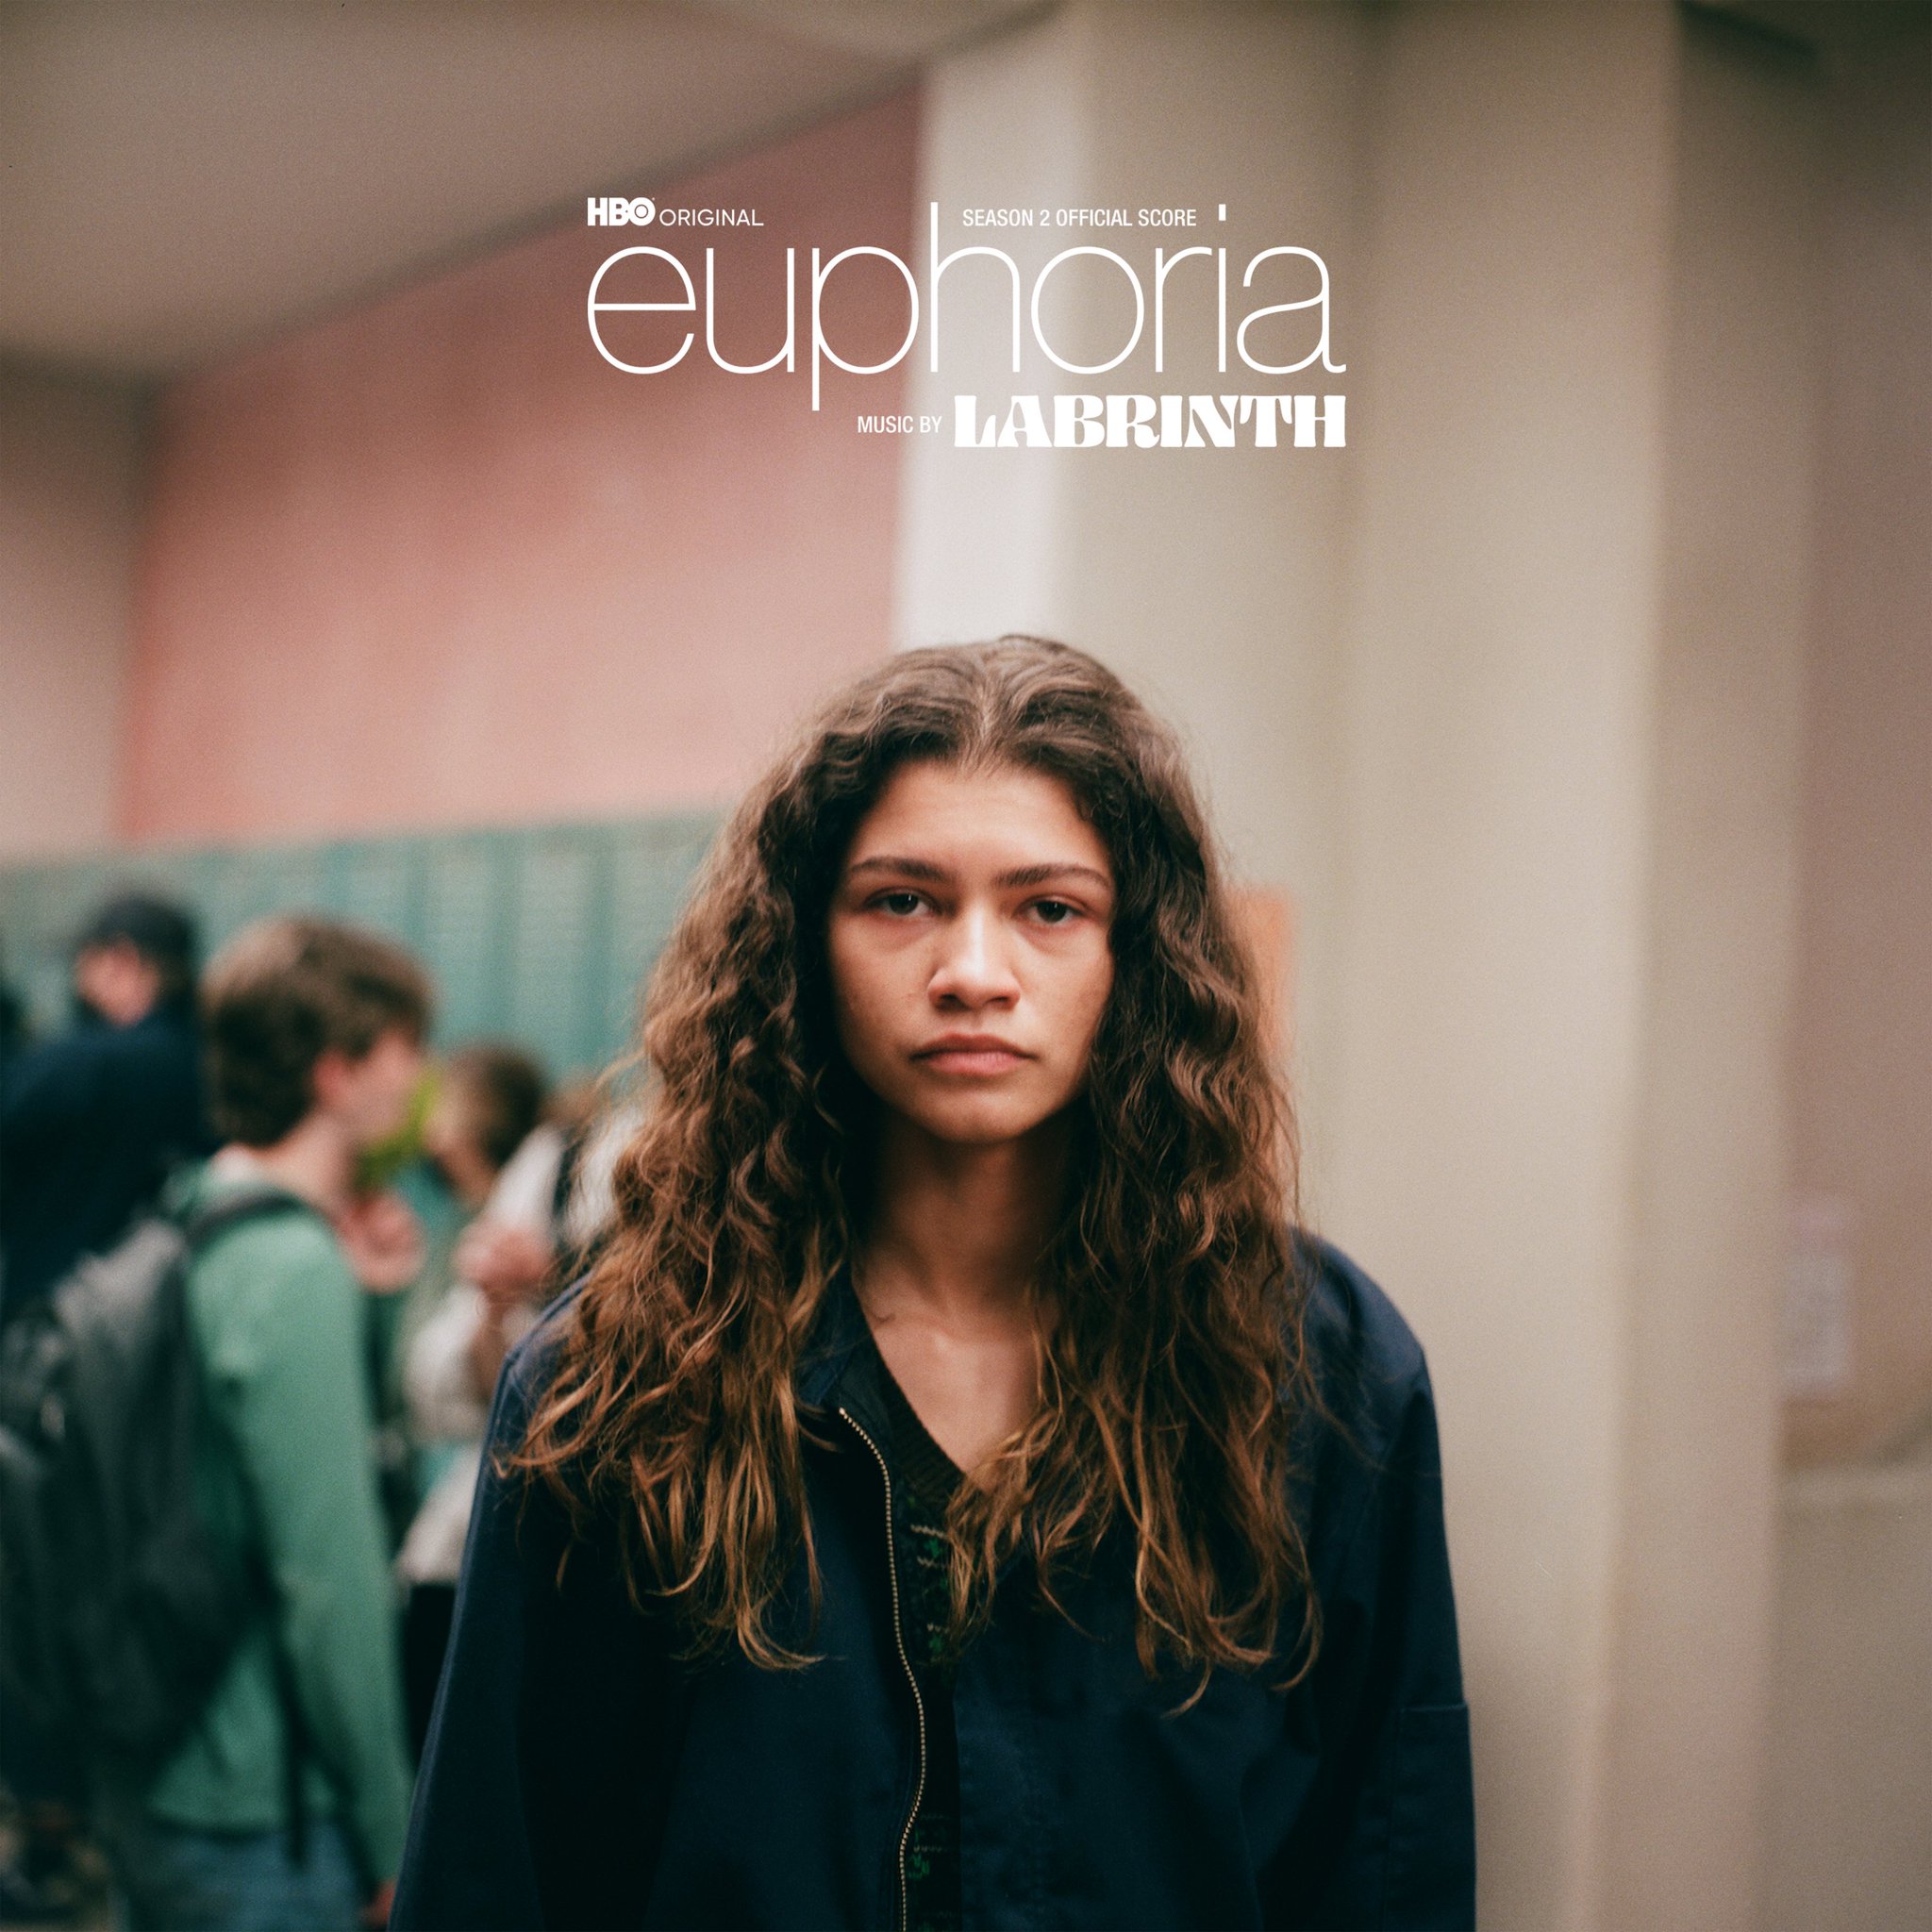 Labrinth — Euphoria Season 2 Official Score (From the HBO Original Series) cover artwork